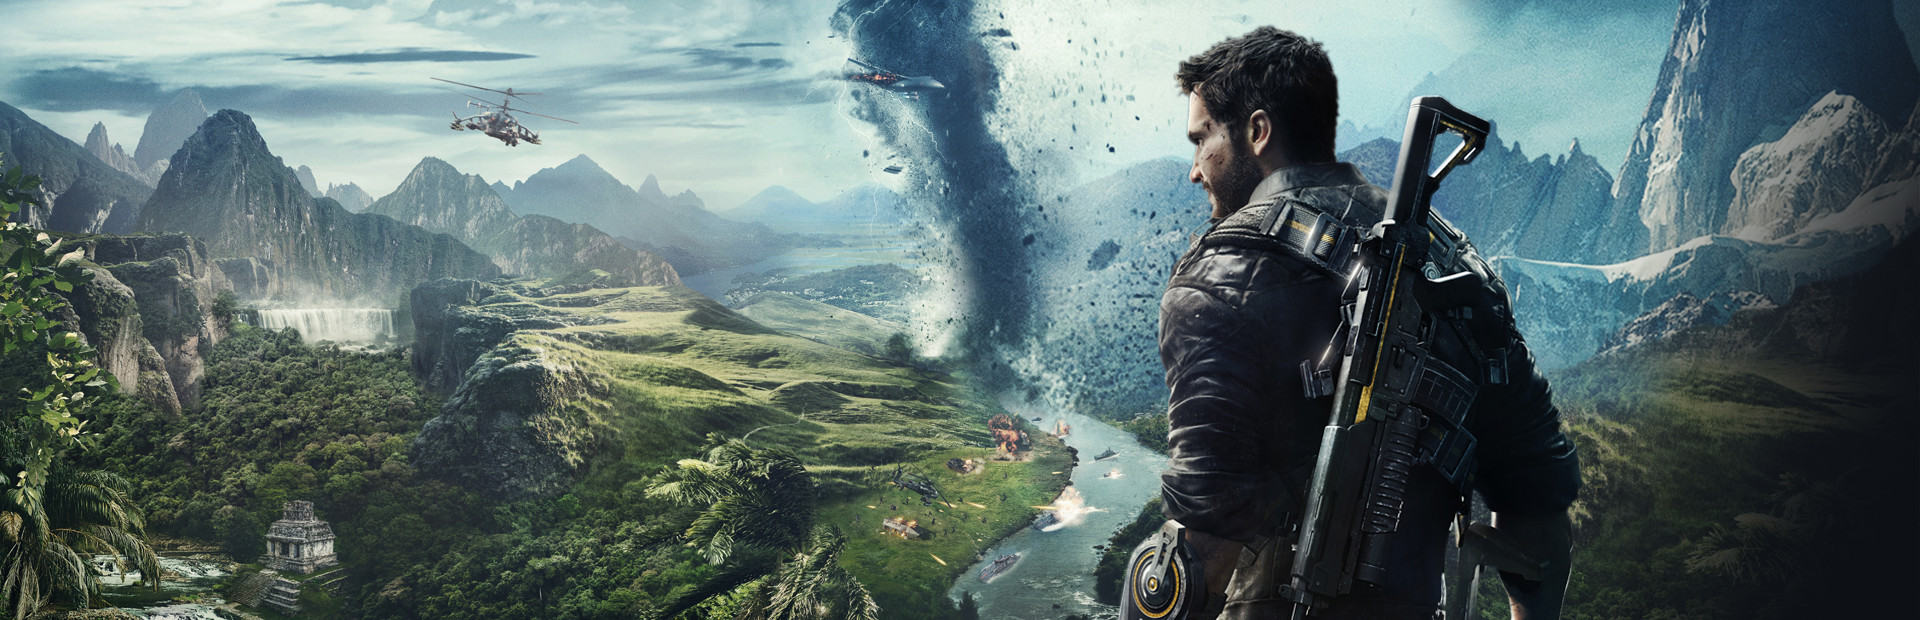 Just Cause 4 Reloaded cover image